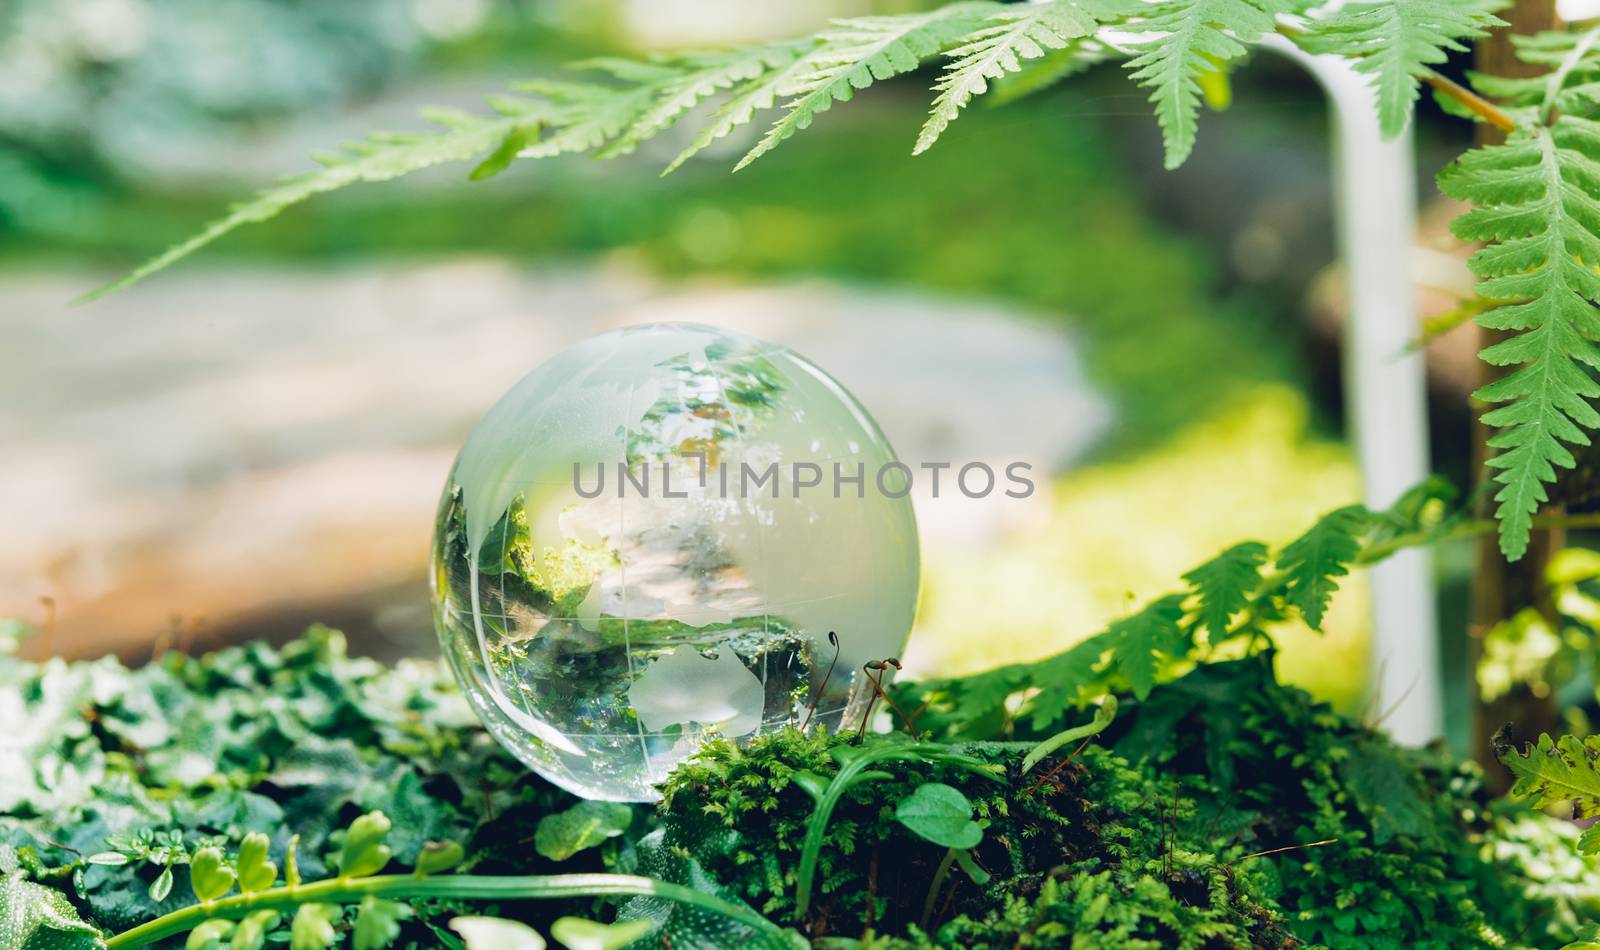 Globe glass in grass forest on nature background, Environment Day Concept